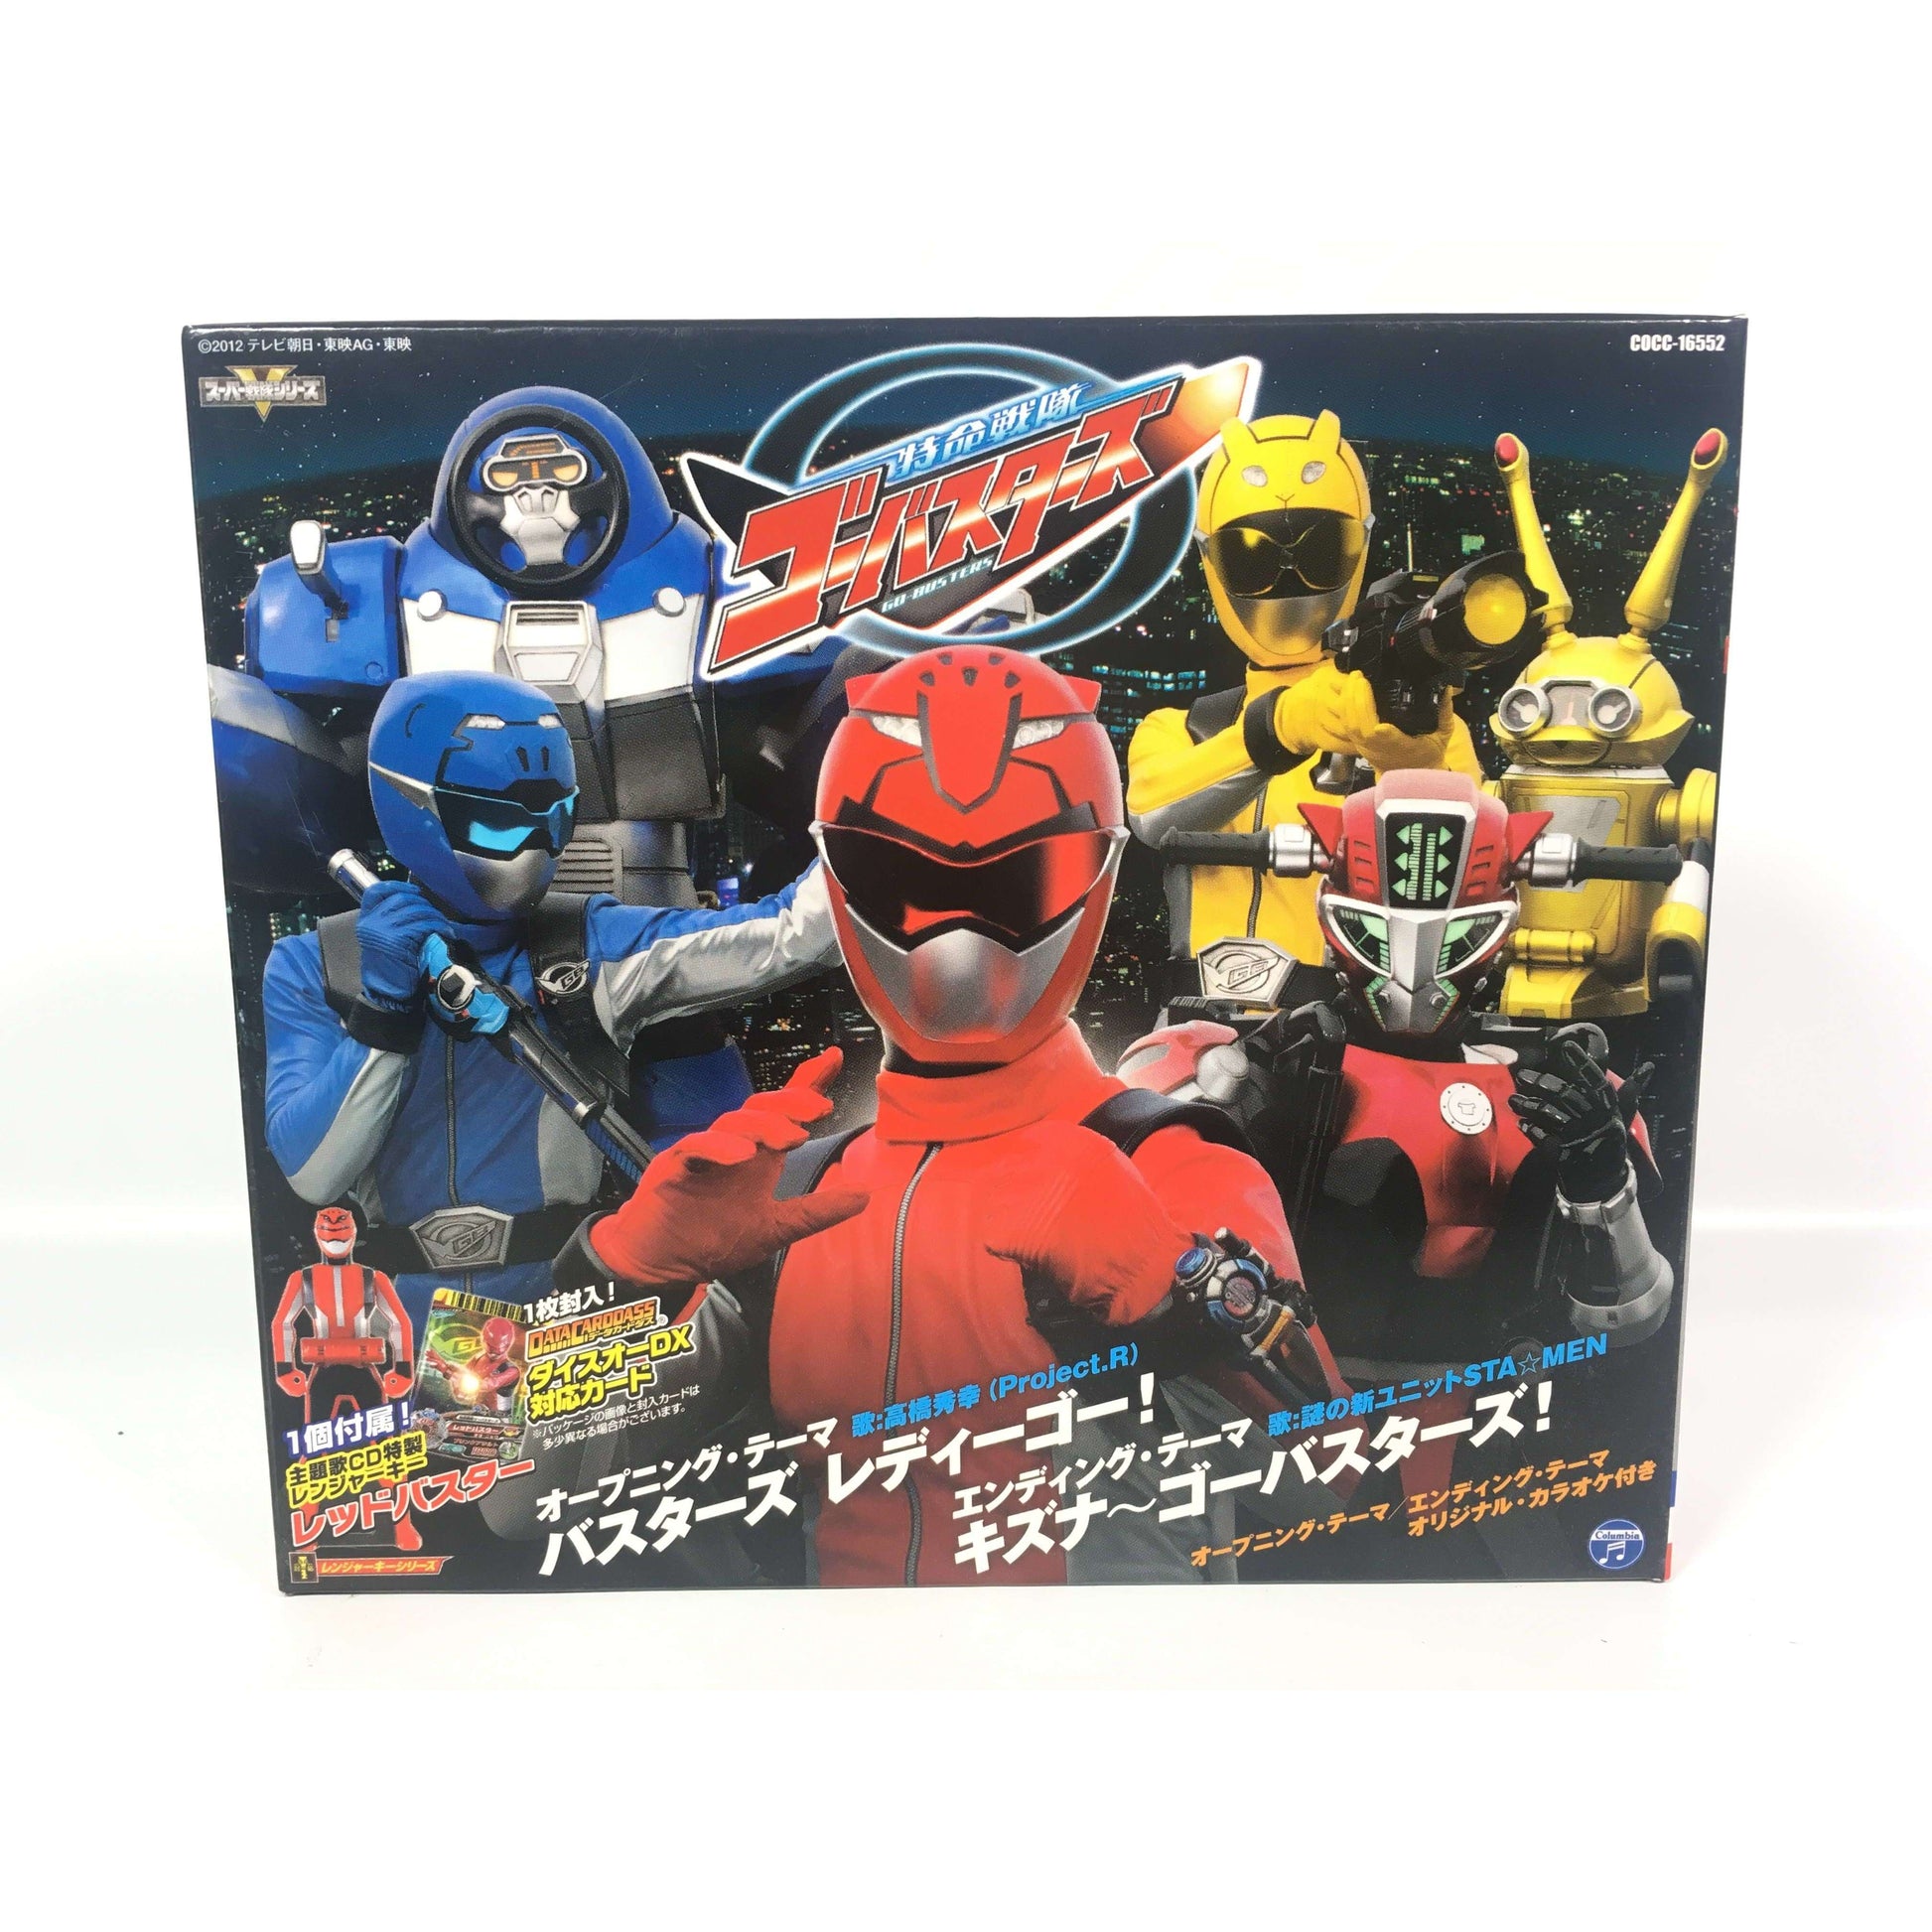 [LOOSE] Tokumei Sentai Go-Busters: Theme Song Single with Red Buster Ranger Key | CSTOYS INTERNATIONAL